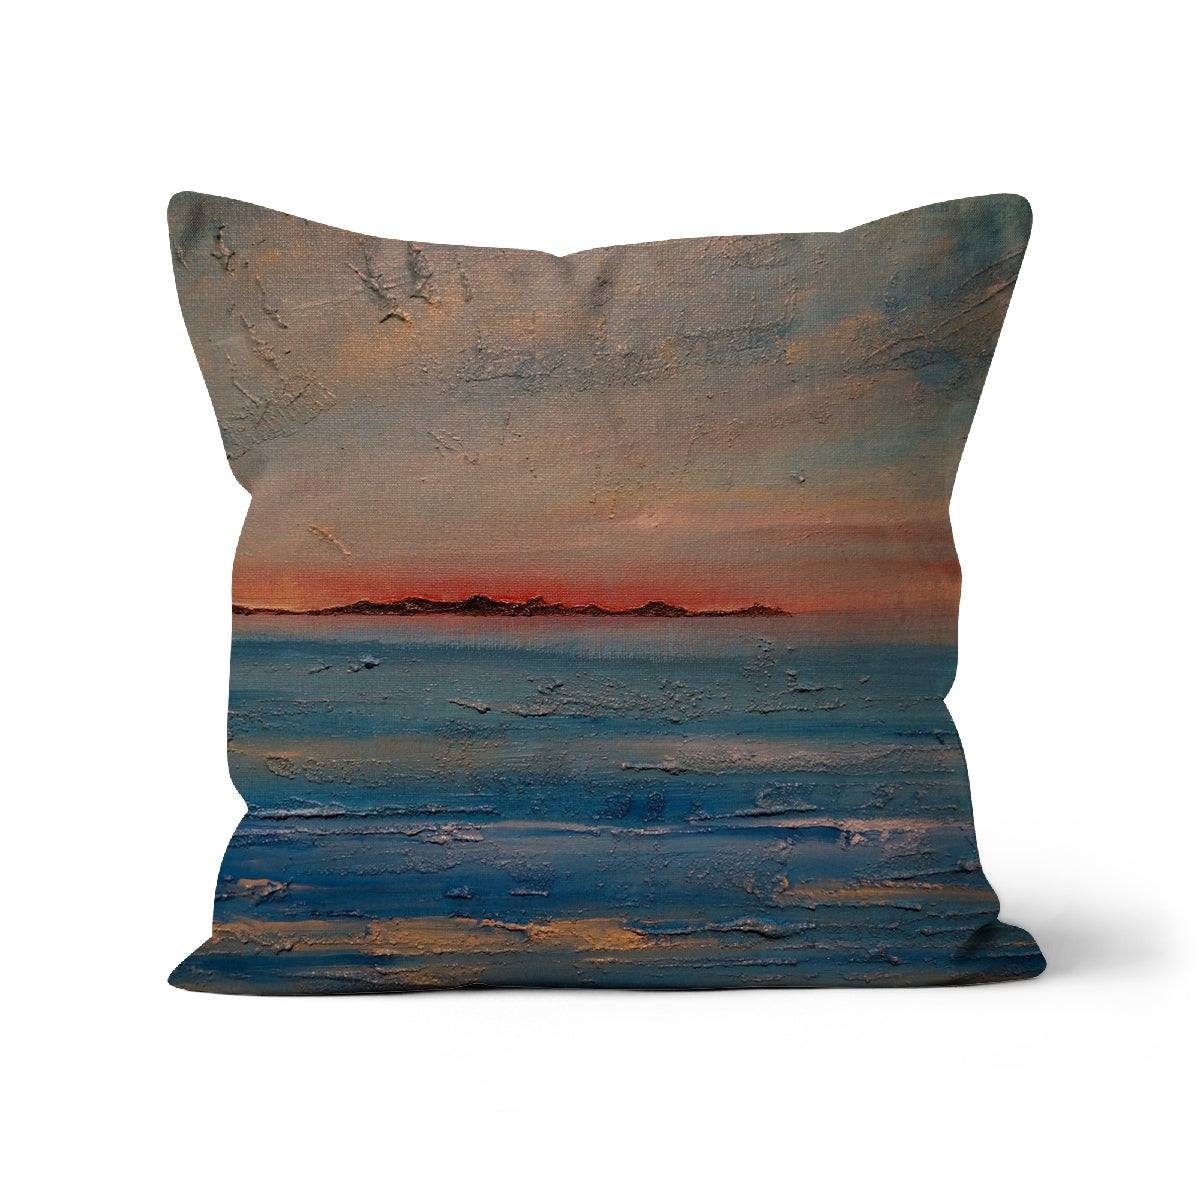 Gigha Sunset Art Gifts Cushion-Cushions-Hebridean Islands Art Gallery-Canvas-22"x22"-Paintings, Prints, Homeware, Art Gifts From Scotland By Scottish Artist Kevin Hunter